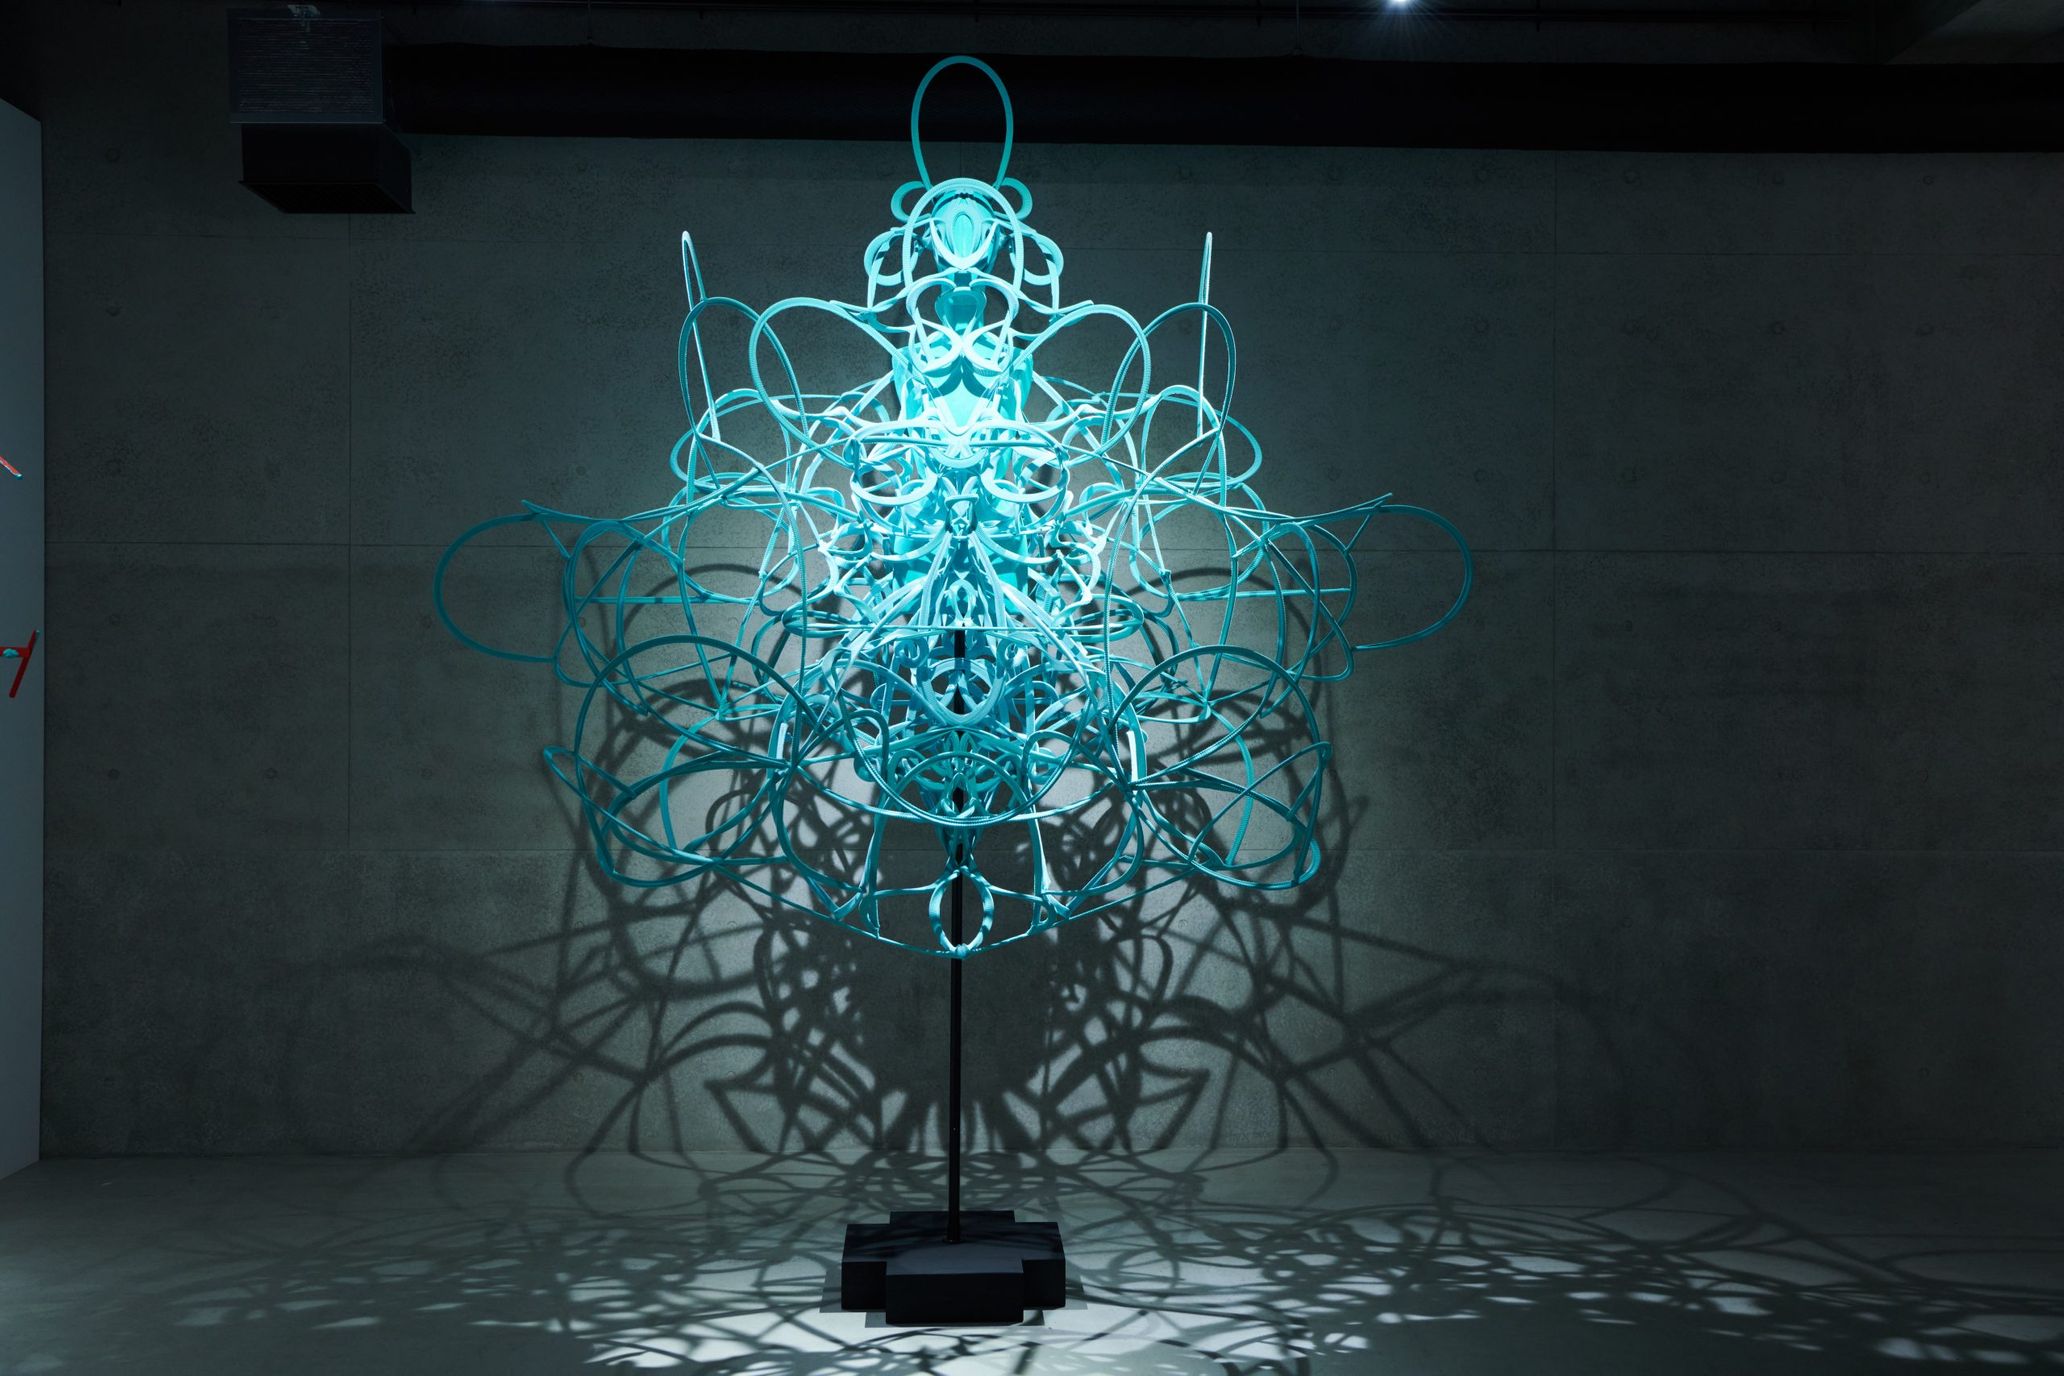 Interview with Fashion Designer Ryunosuke Okazaki: On Vital Instincts Expressed through Symmetrical Forms and Solo Sculpture Exhibition “002” in Resonance with Prayer